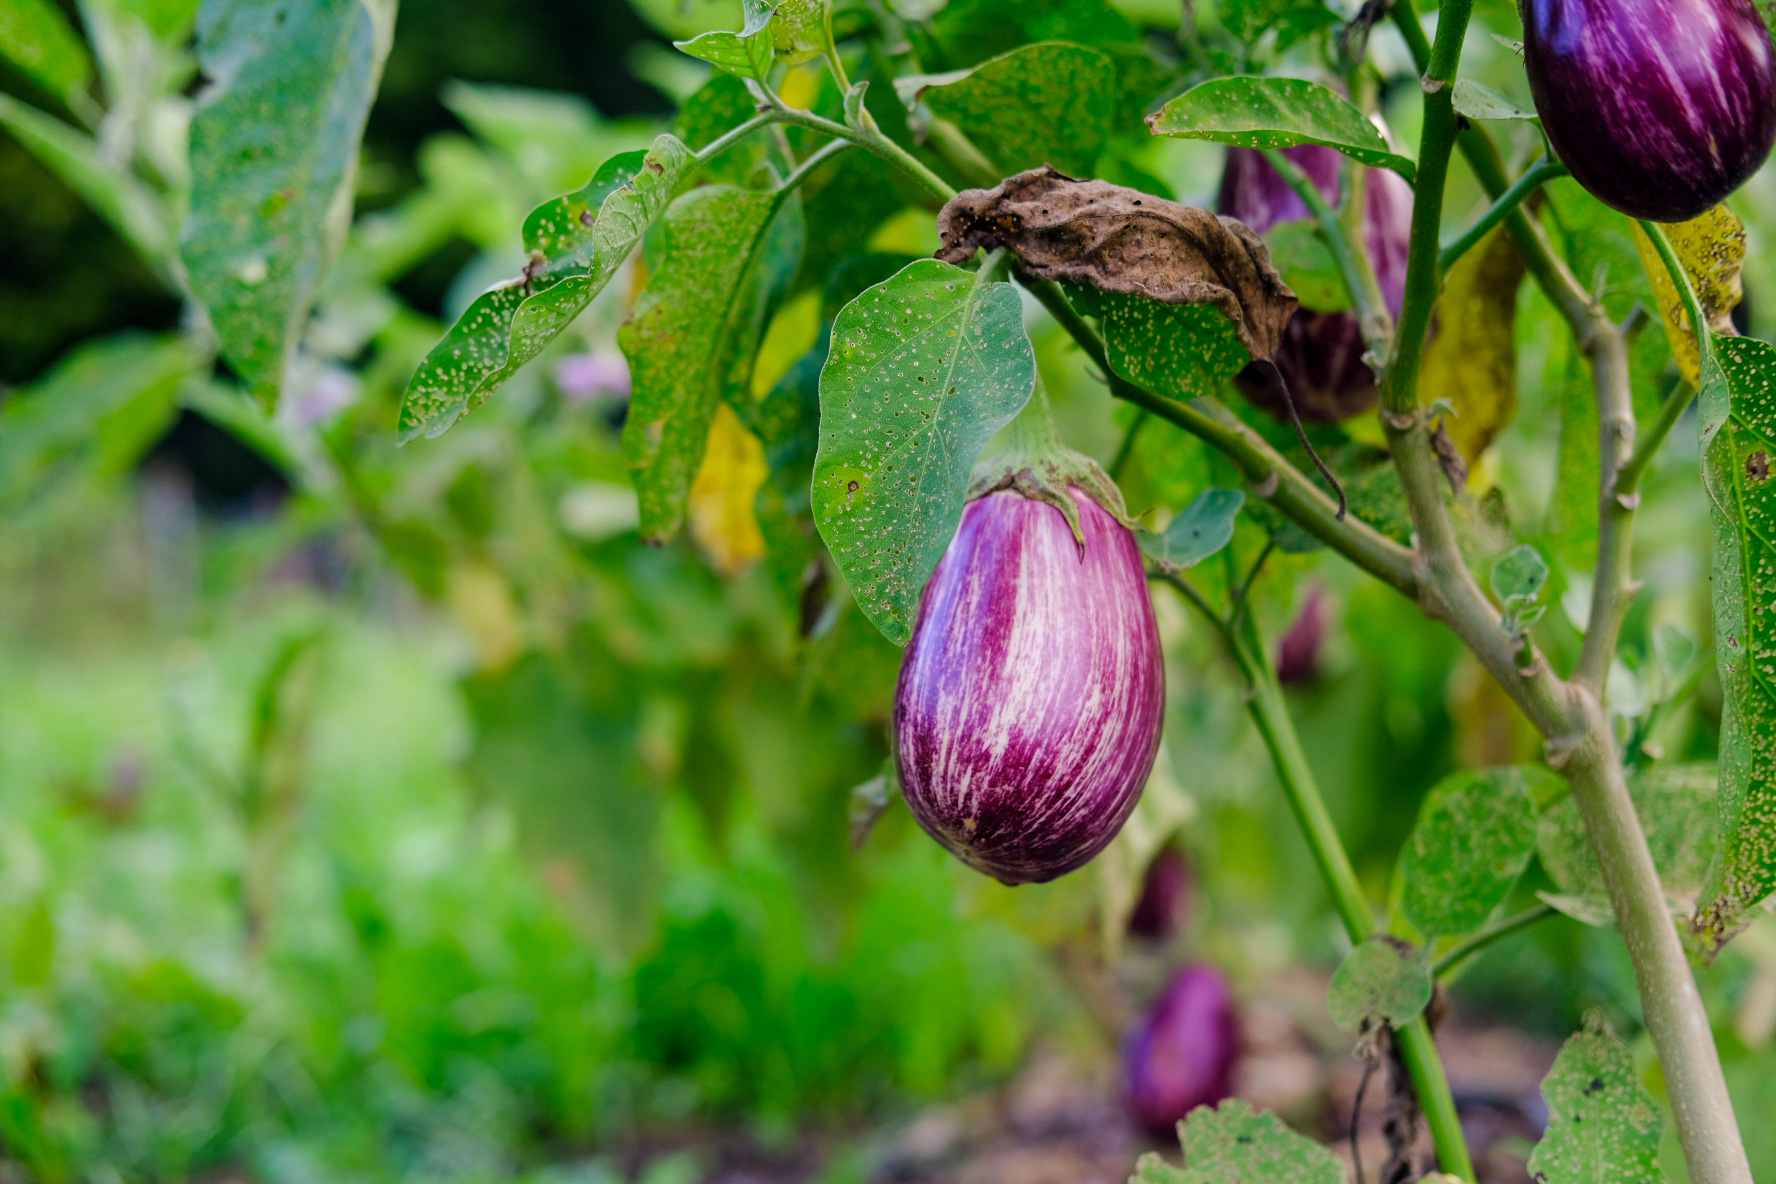 A purple eggplant hangs from the plant.